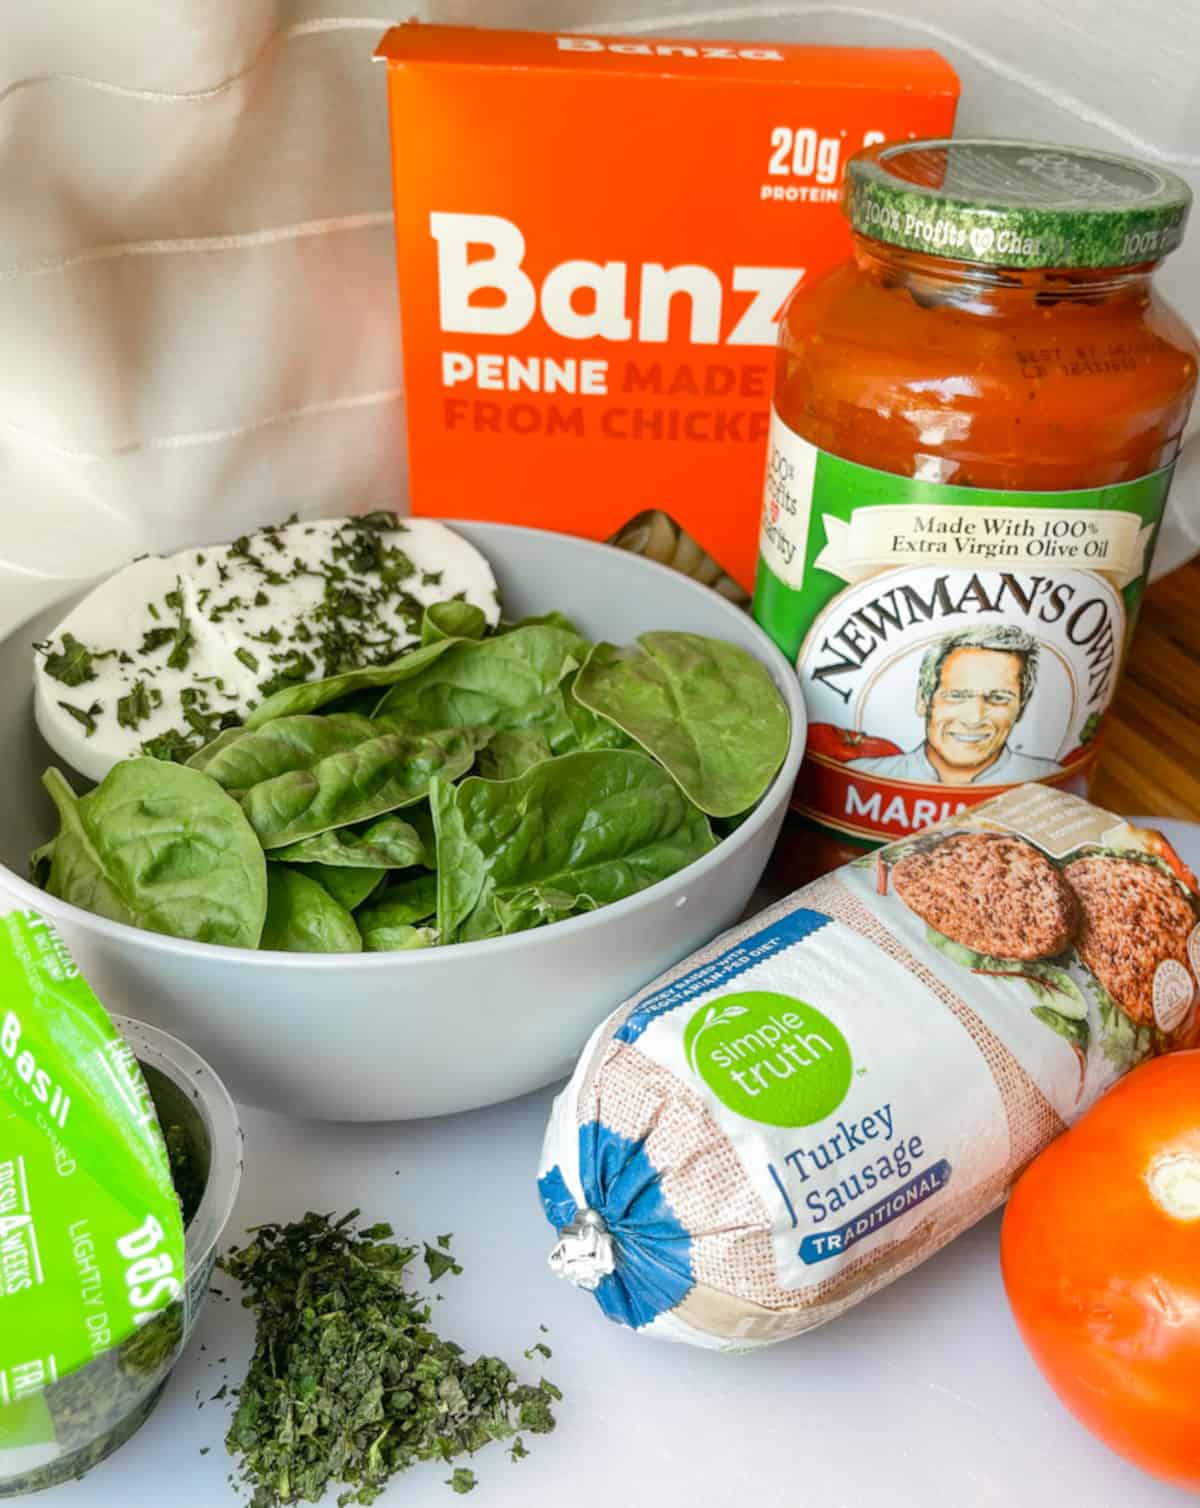 fresh spinach, and fresh mozzarella in a bowl, box of Banza penne, Newmans own marinara sauce, simple truth traditional turkey sausage, and basil Blakes lightly dried on a cutting board- all ingredients ready for healthy spinach and sausage skillet